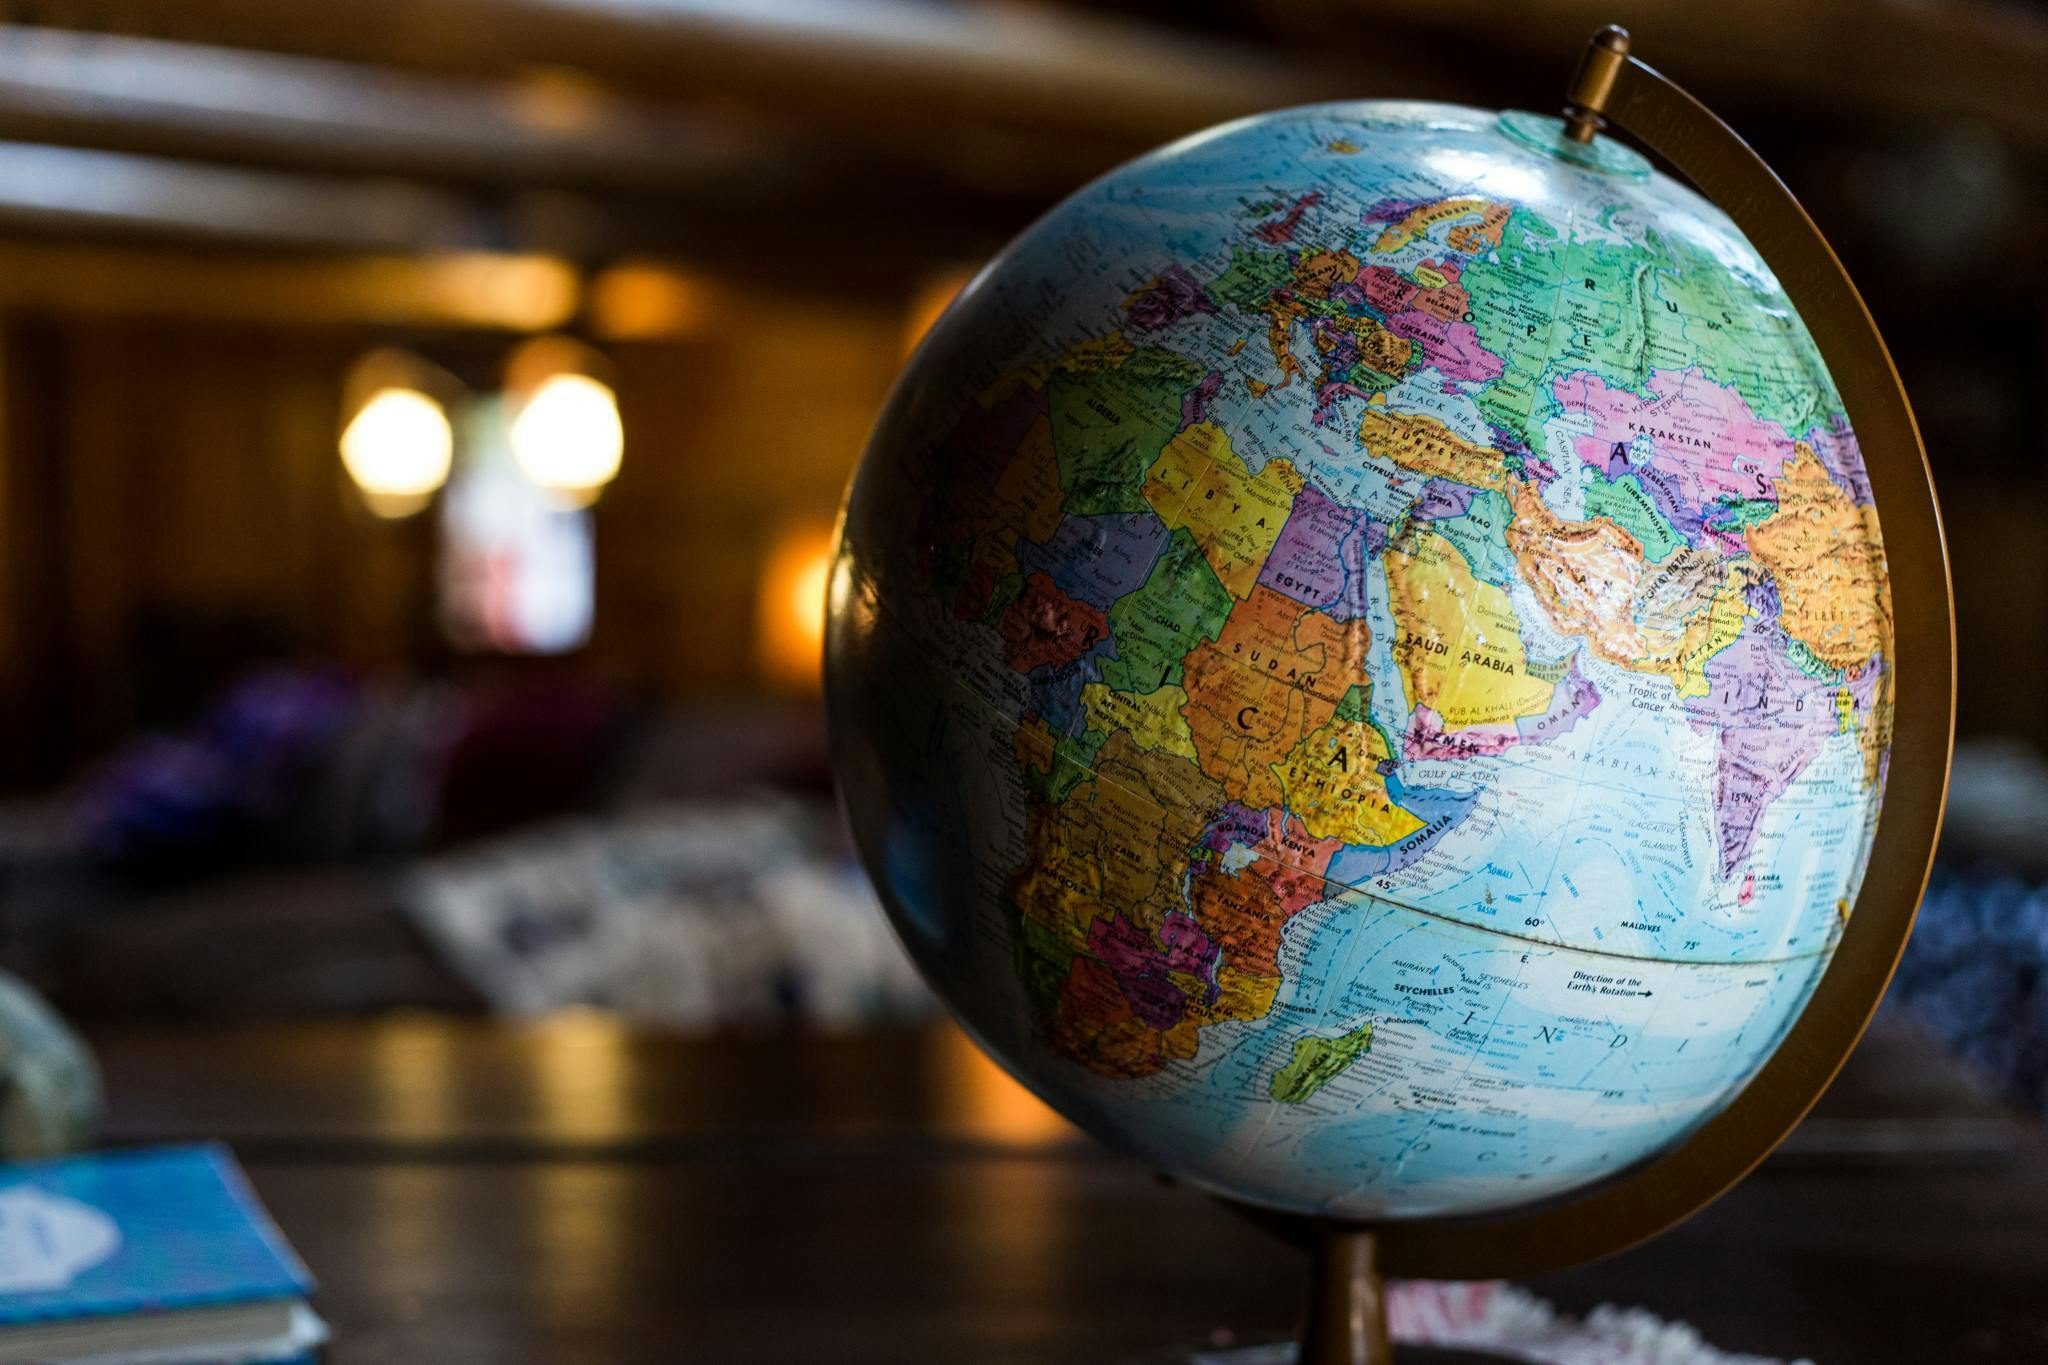 A globe turned to display the Middle East and Central / West Asia sitting on a wood desk in a wood-paneled room.